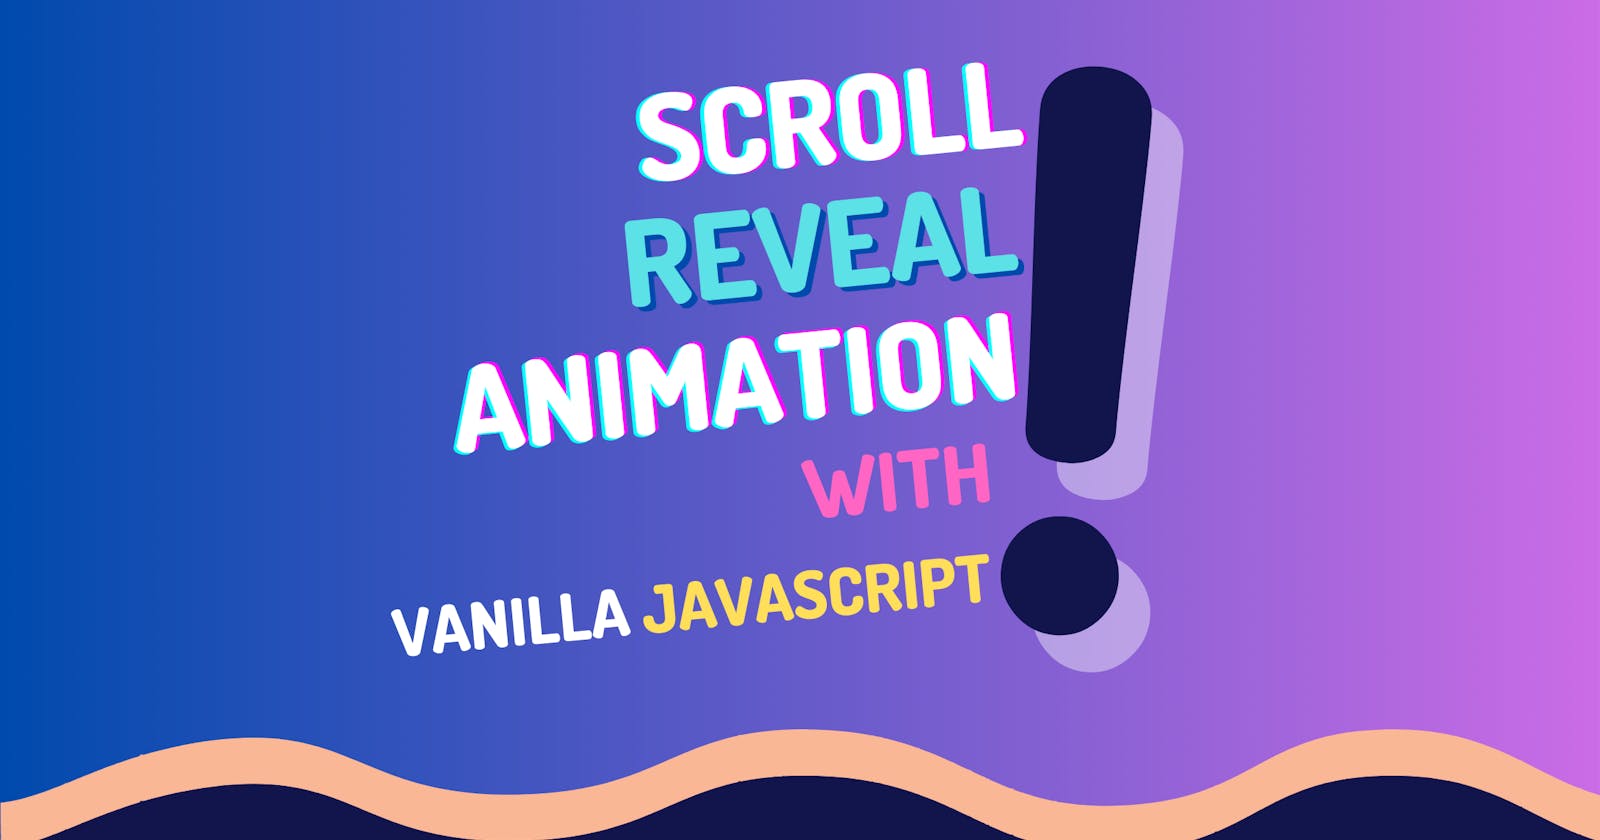 Create Scroll Reveal Effect on Websites with just JavaScript!